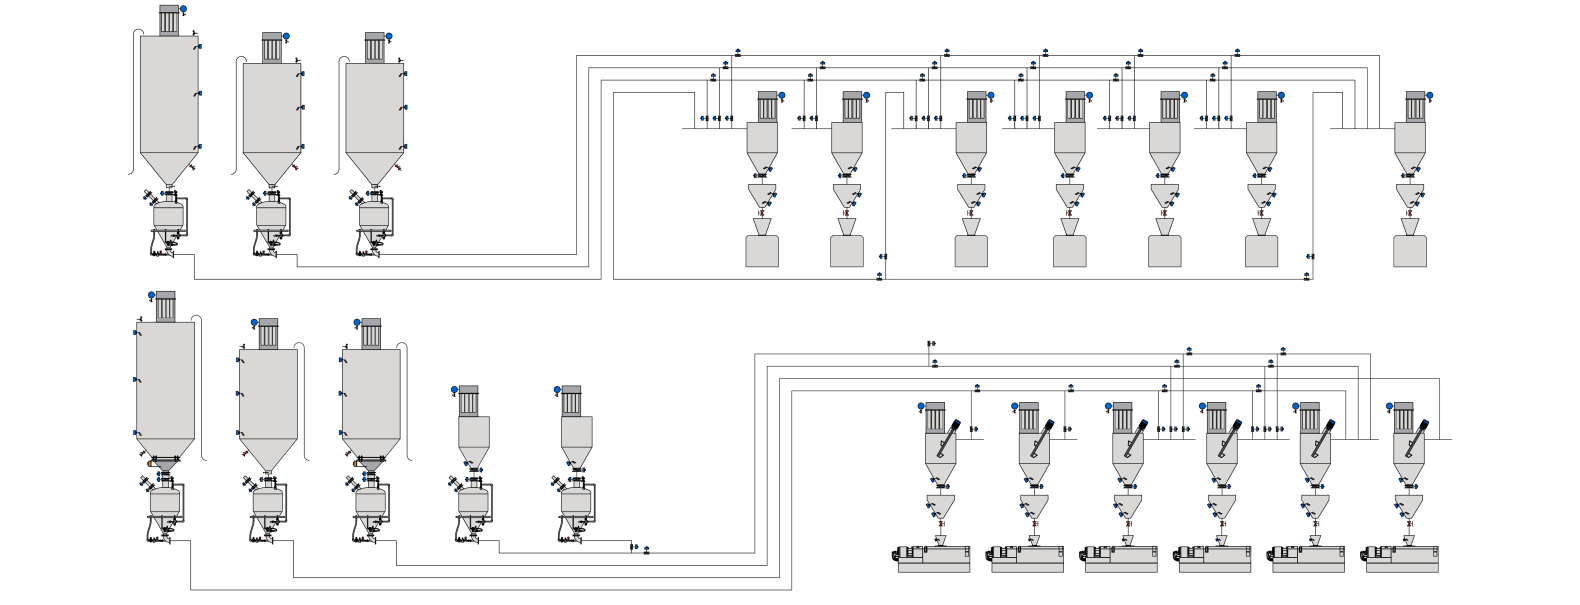 Central Feeding for Extruders